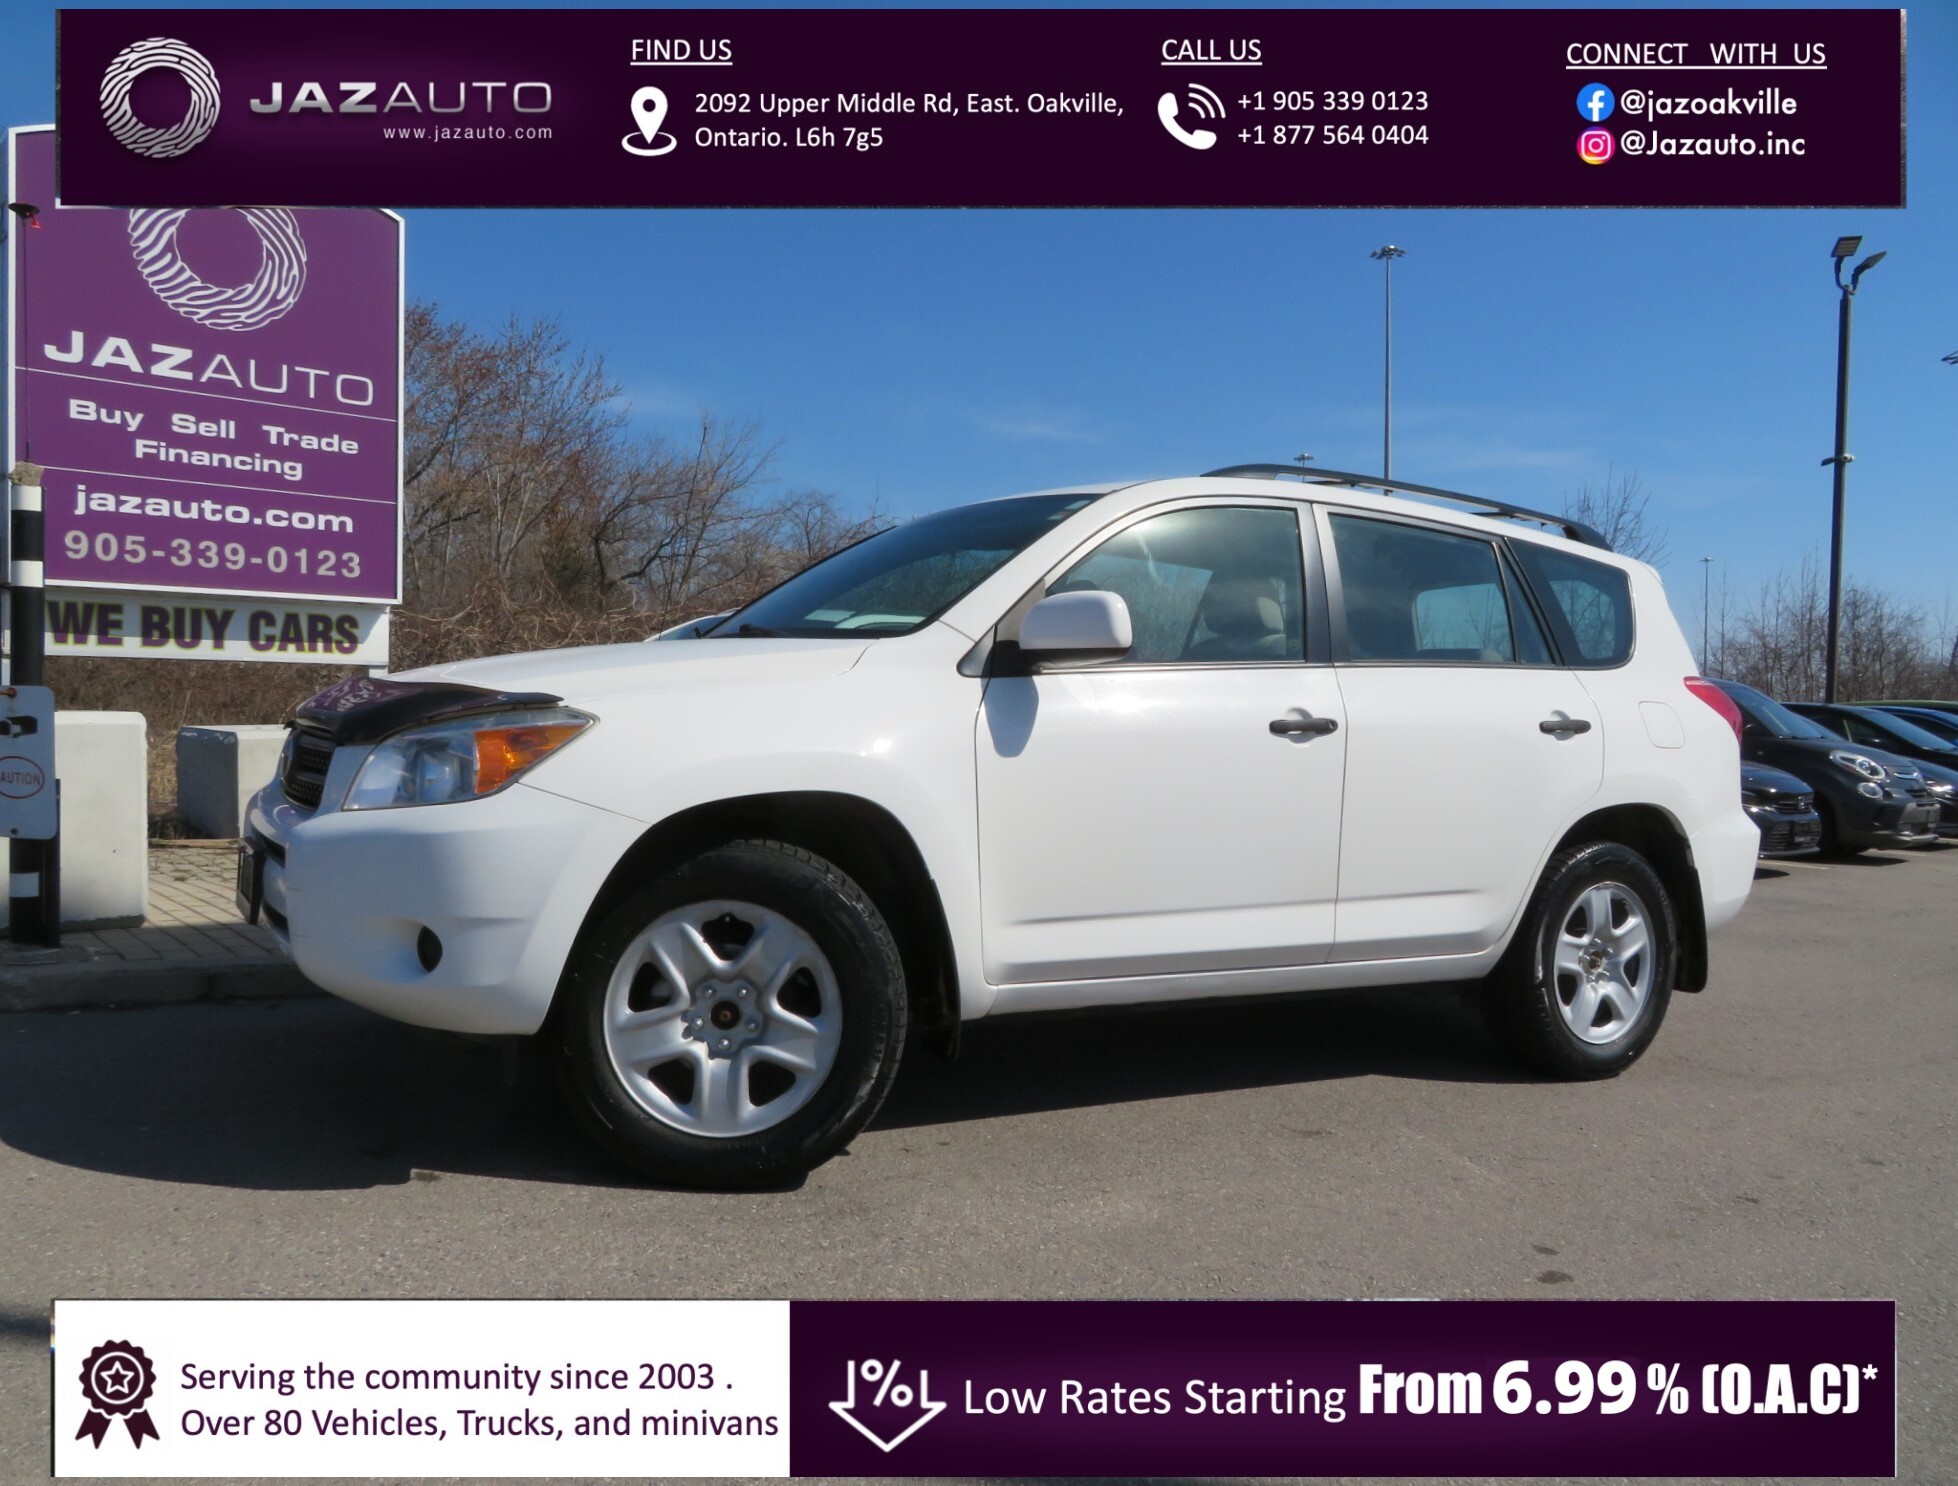 2007 Toyota RAV4 CLEAN CAR FAX 4X4  AND RUNS WELL. COMES SEE TEST D